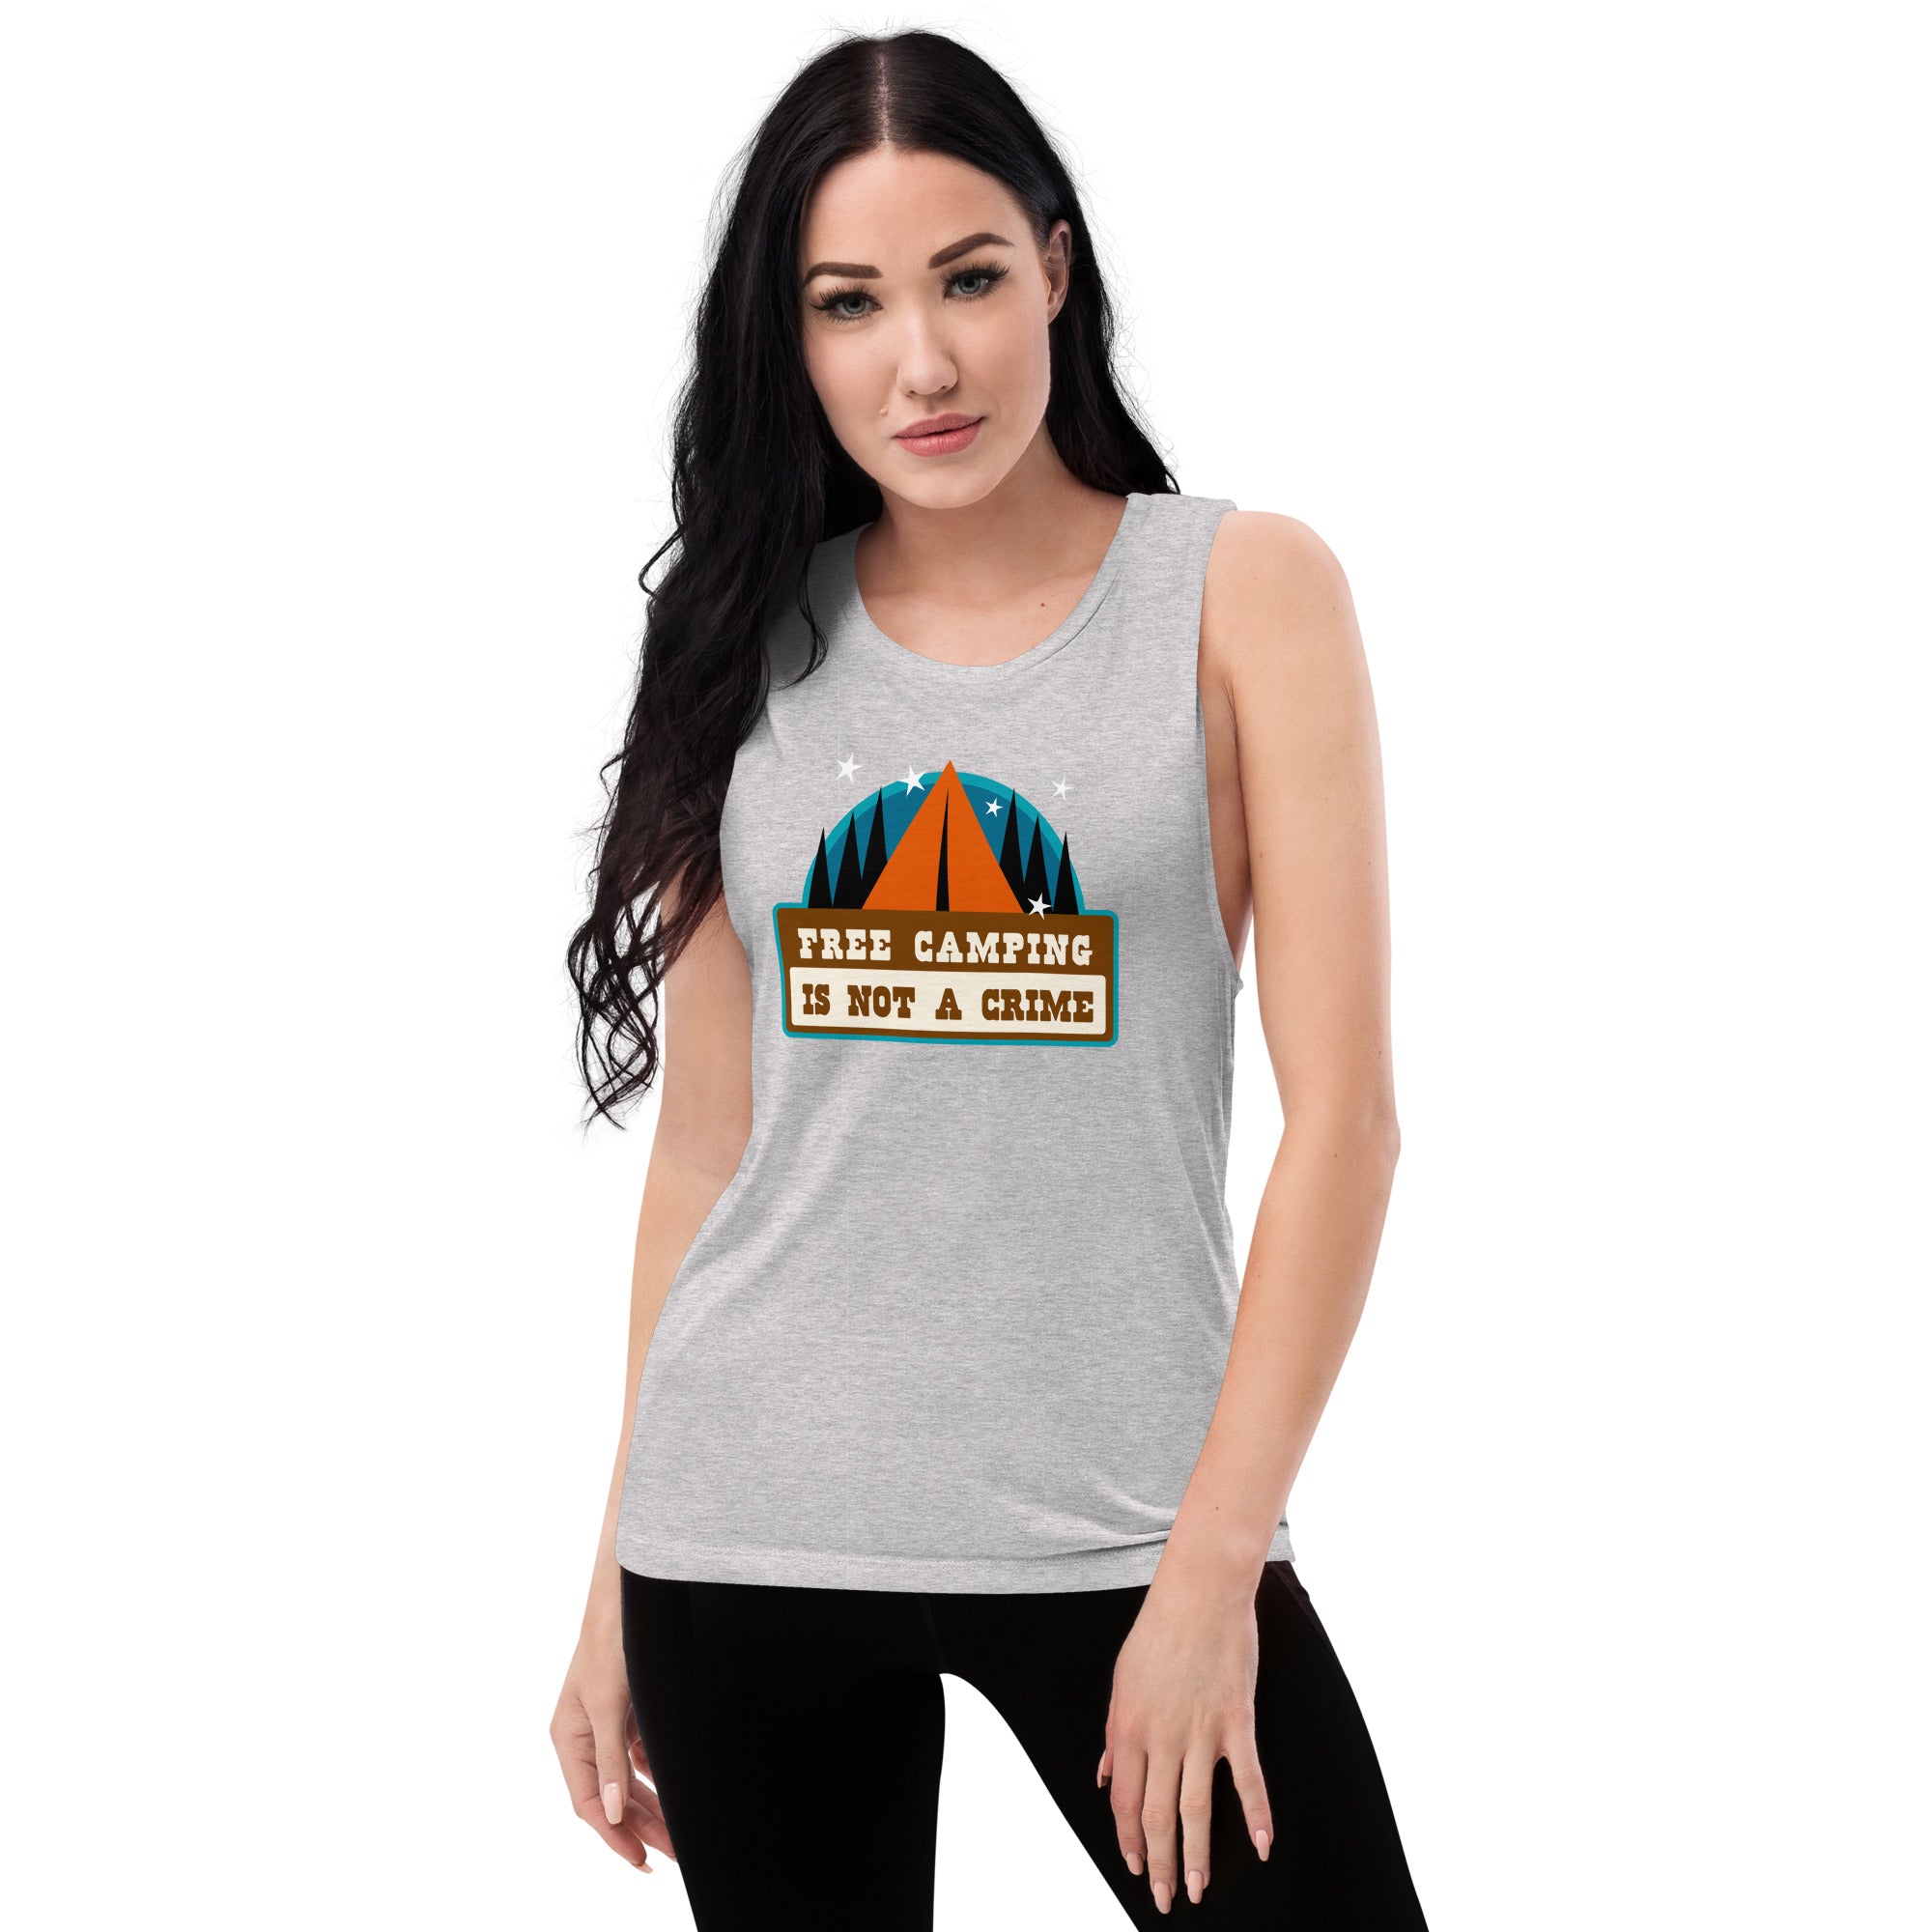 T-Shirt sans manches pour Femme Free camping is not a crime Graphic